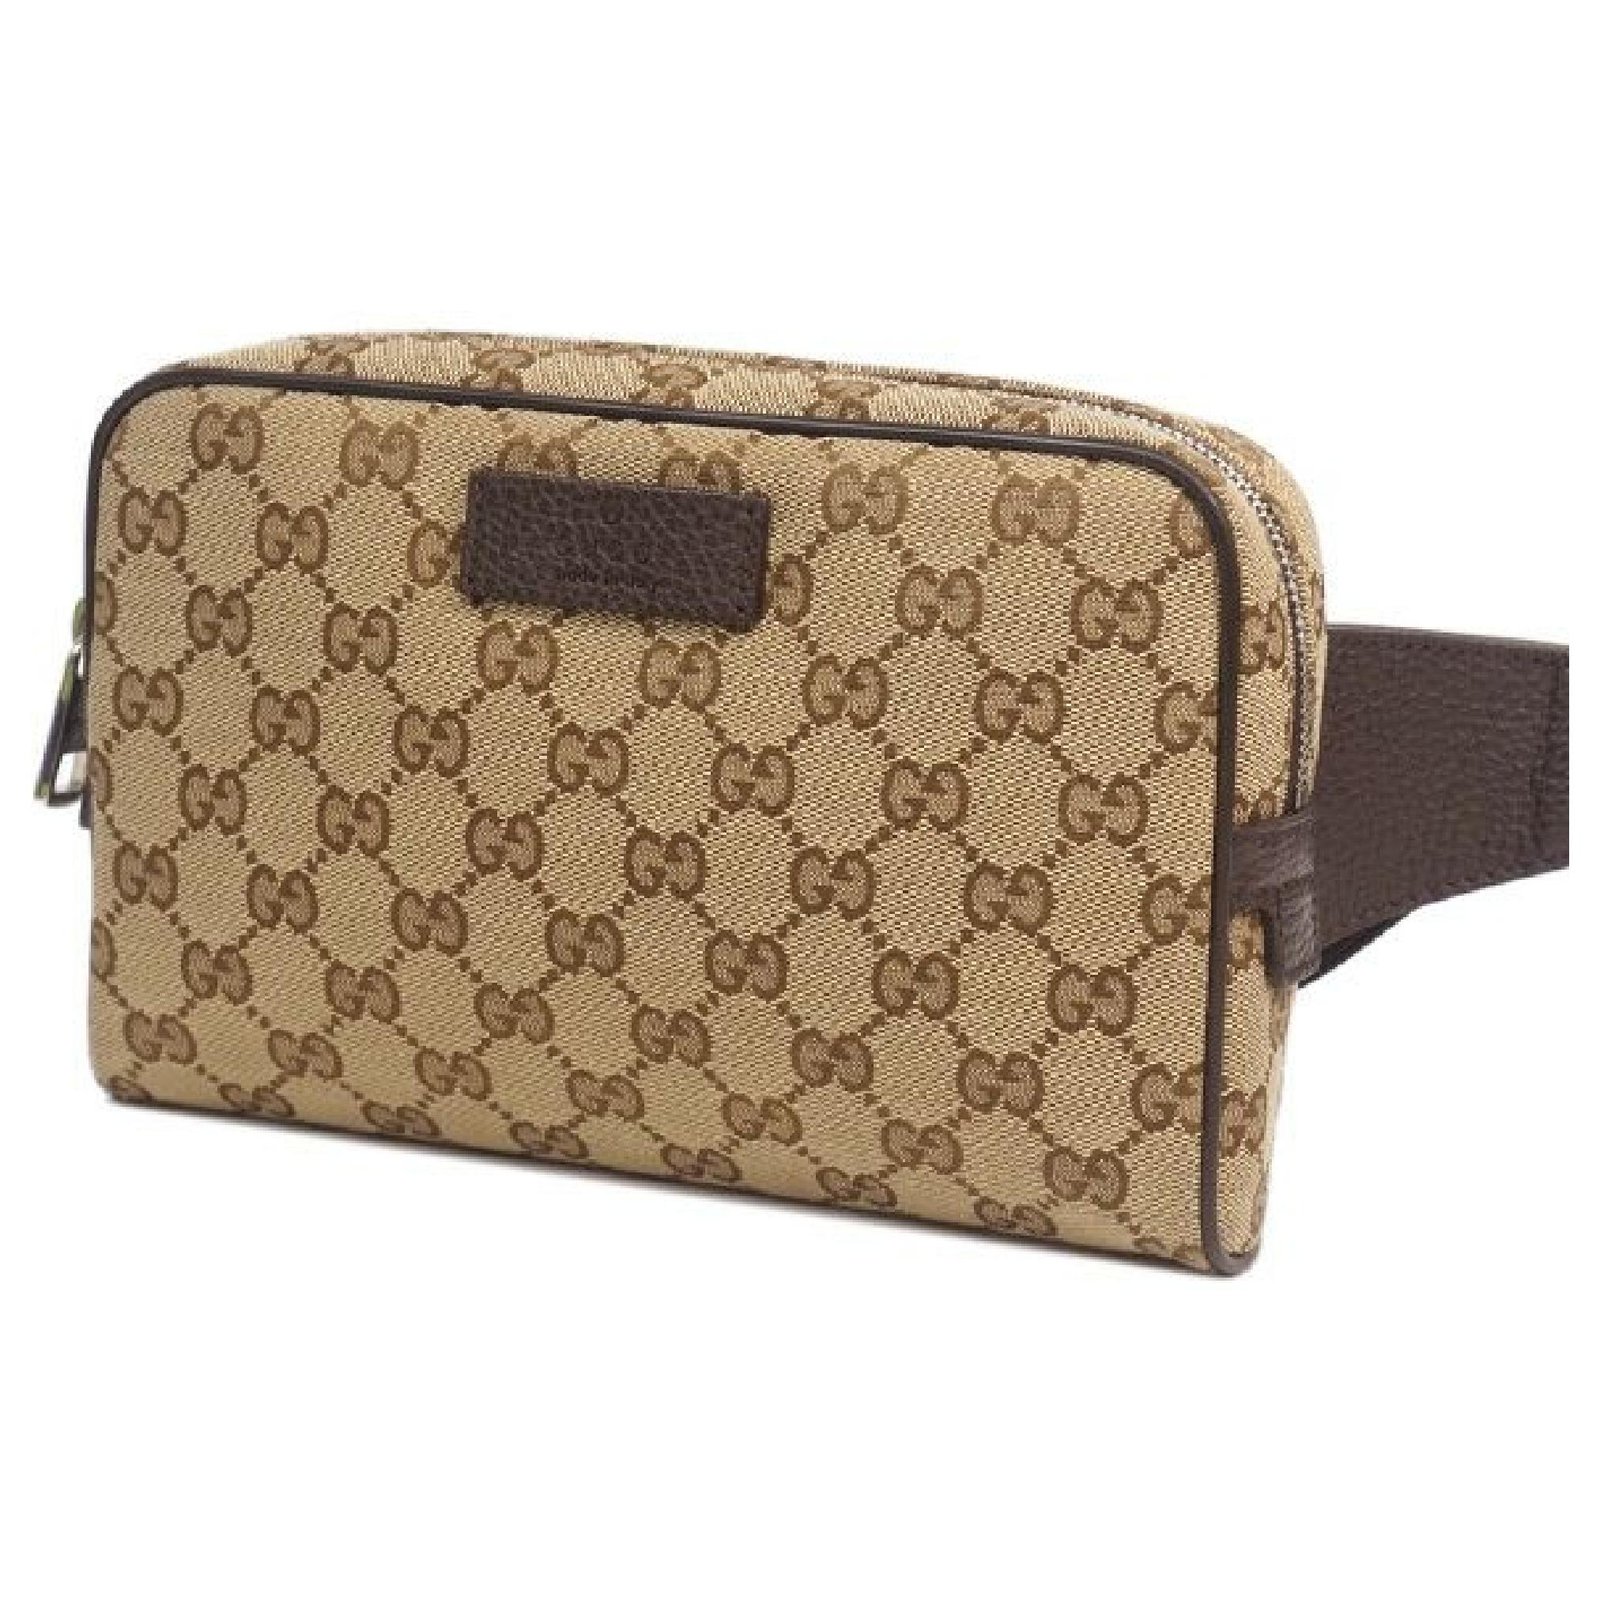 Gucci Gucci body bag Womens Waist bag 449174 beige x brown Handbags Leather,Other Brown,Beige ...